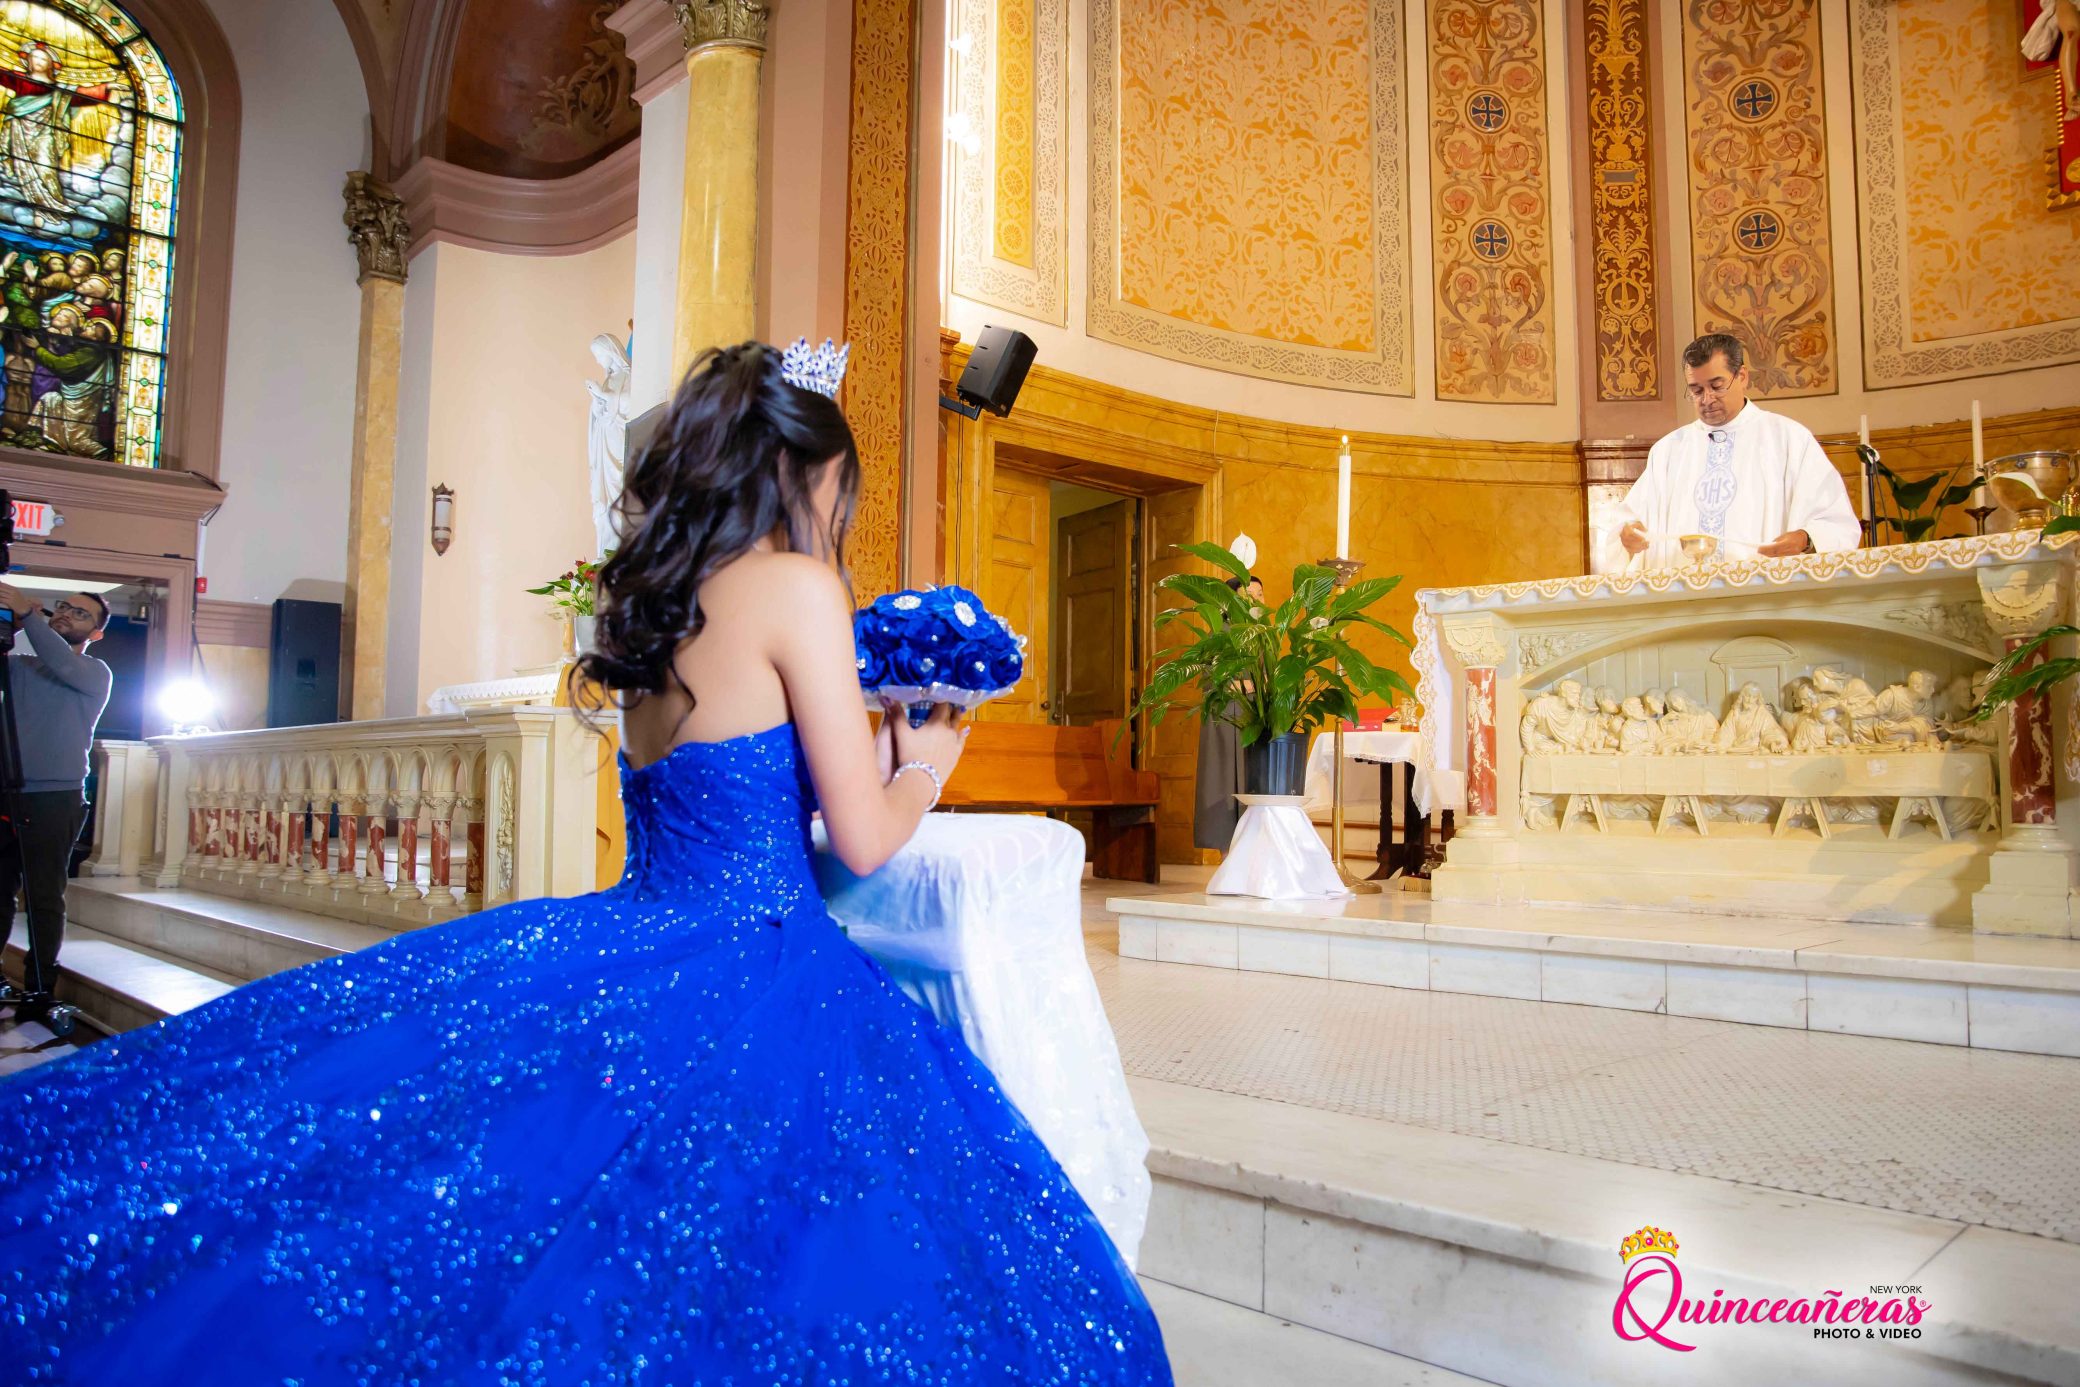 Quinceañera Packages. Deluxe package - photos & video ... there is an additional portrait and video session at least a week before the Quinceañera